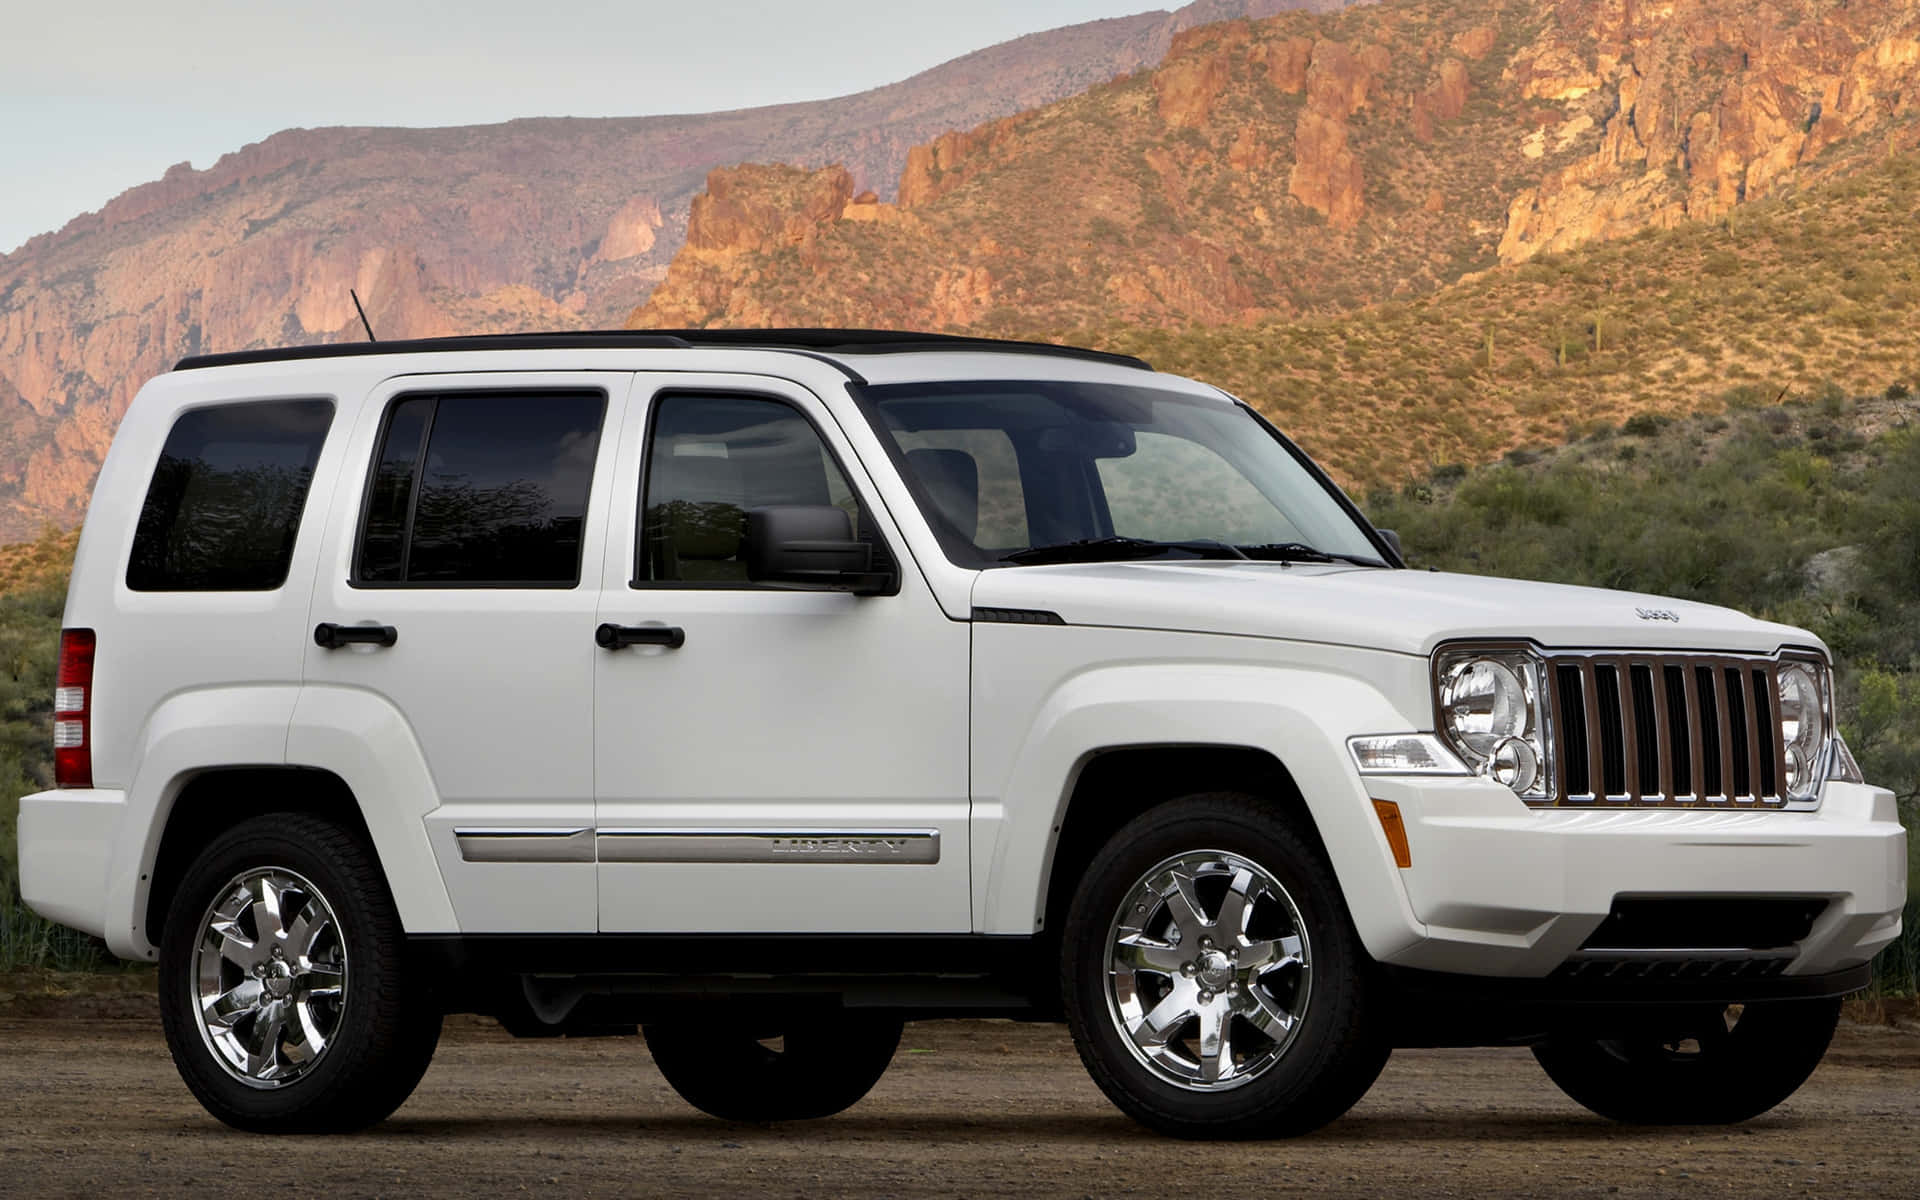 Jeep Liberty in Nature Wallpaper